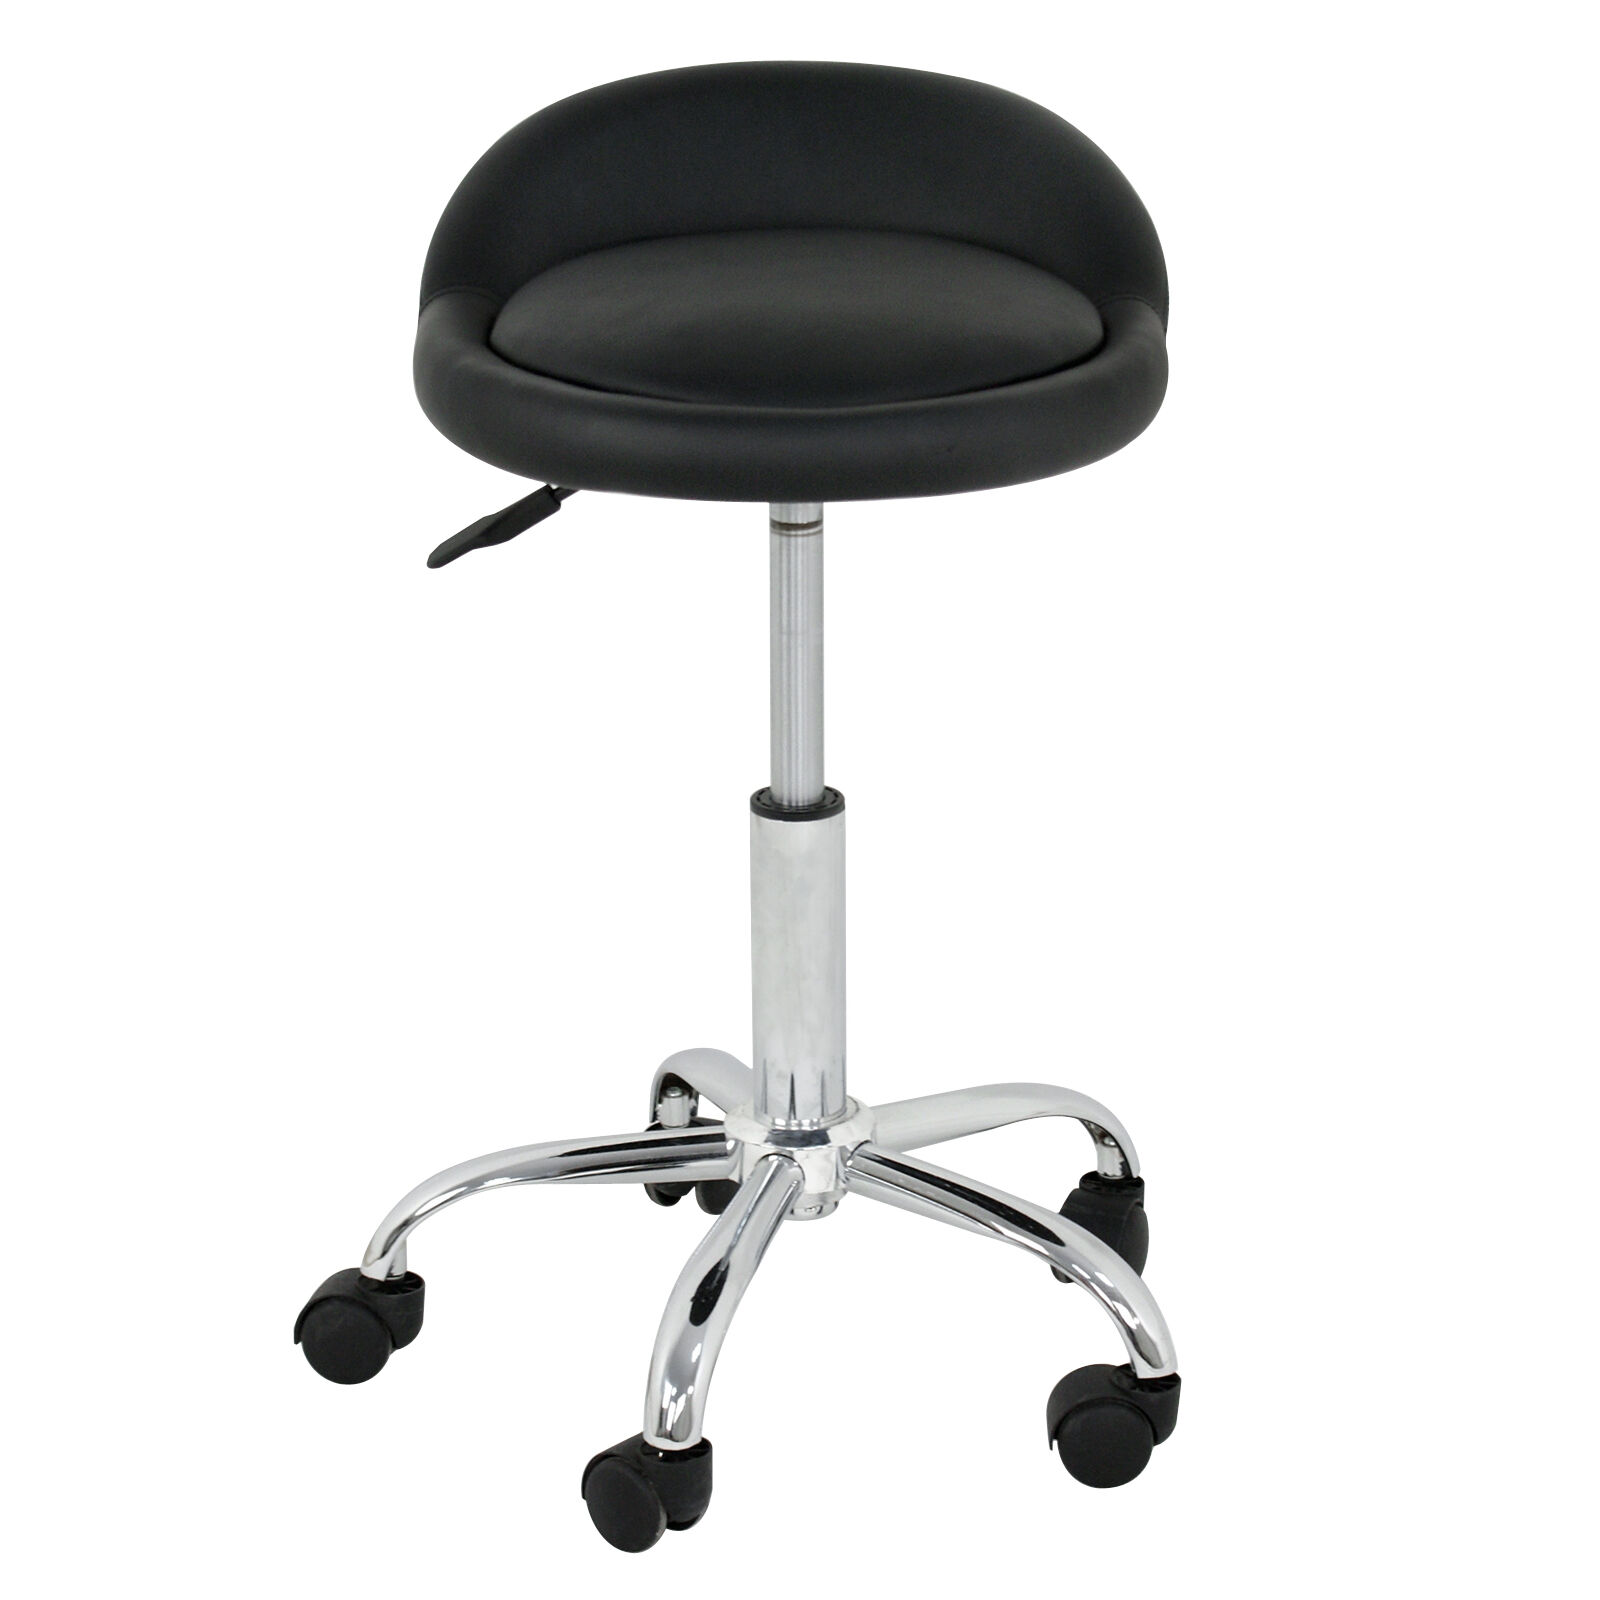 Adjustable Hydraulic Rolling Swivel Salon Tattoo Facial Spa Chair With Back Rest